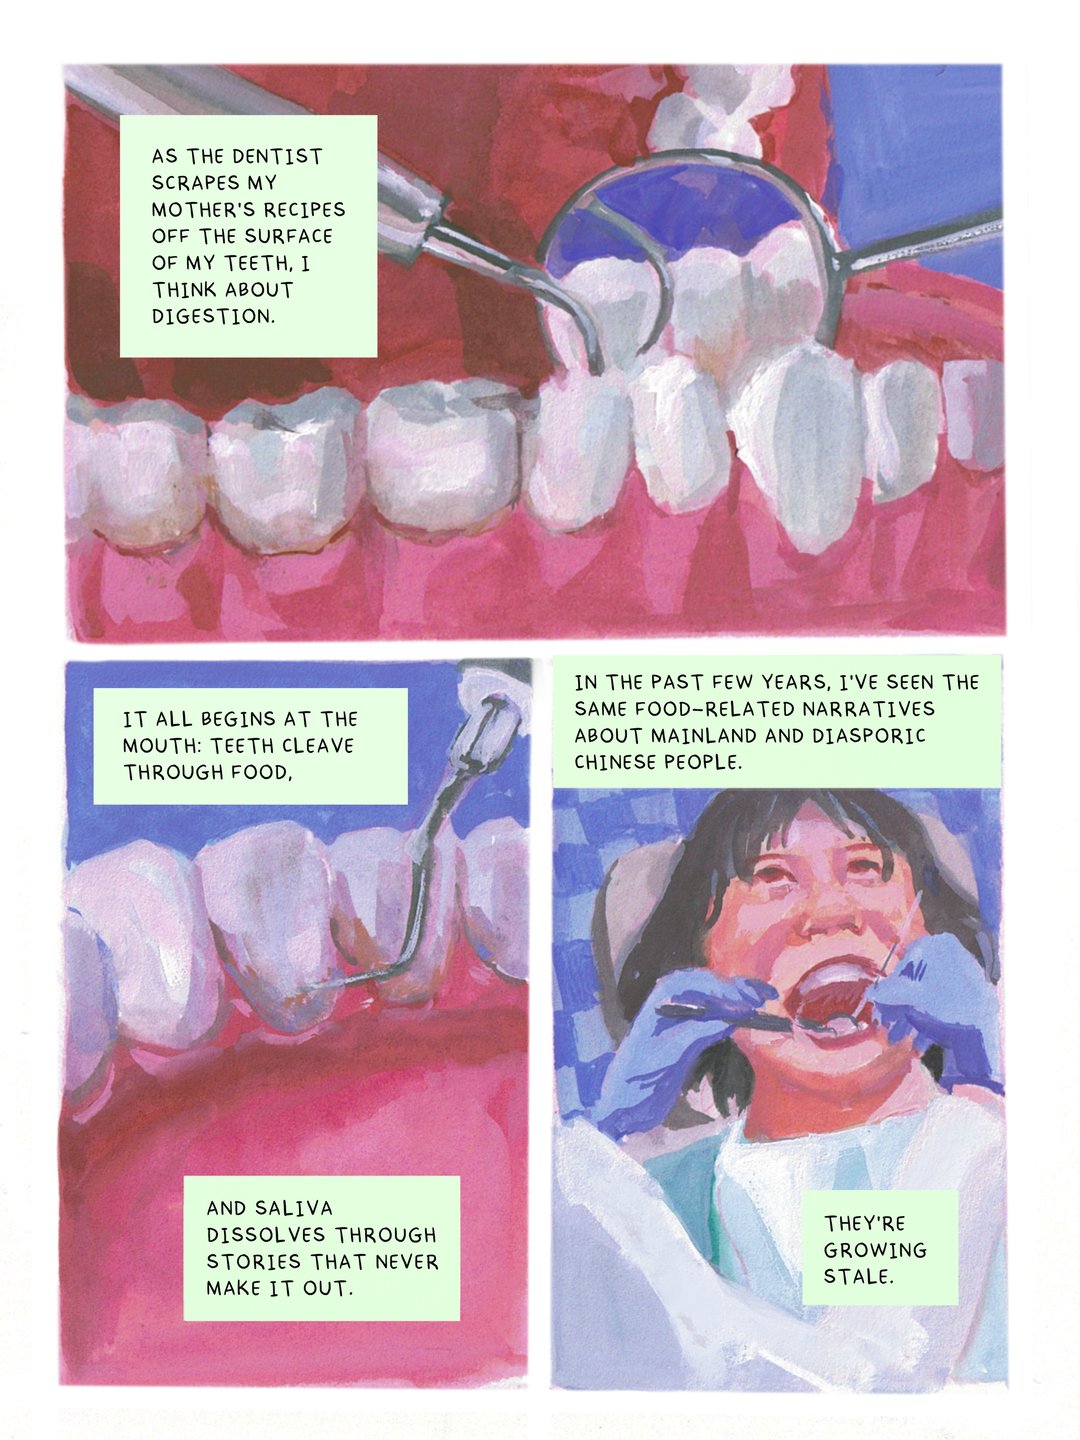 As the dentist scrapes my mother’s recipes off the surface of my teeth, I think about digestion. It all begins at the mouth: teeth cleave through food, and saliva dissolves through stories that never make it out. In the past few years, I’ve seen the same food-related narratives about mainland and diasporic Chinese people. They’re growing stale.